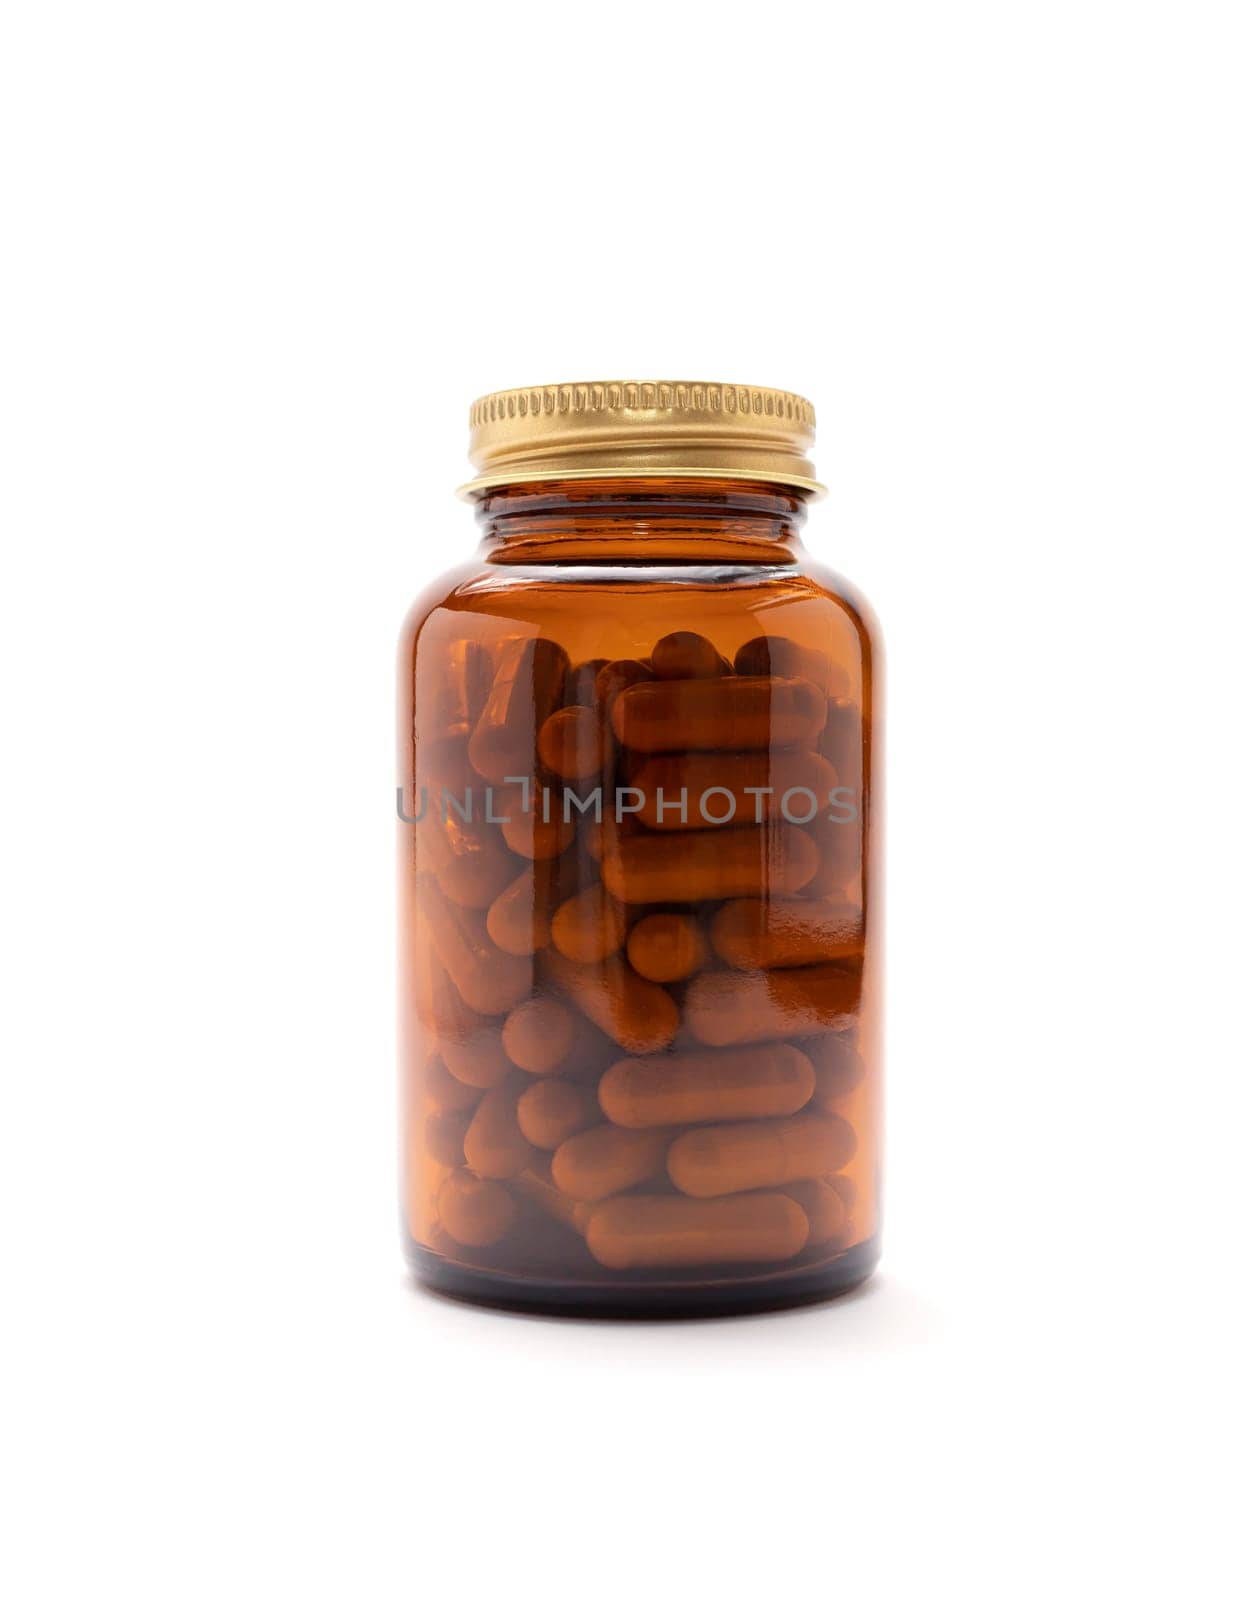 Isolated Brown Glass Bottle With Softgel Capsules OF Slippery Elm On Whitet Background, Copy Space for Text. Herbal Supplement, Ulmus Fulva, Natural Remedy. Vertical plane.